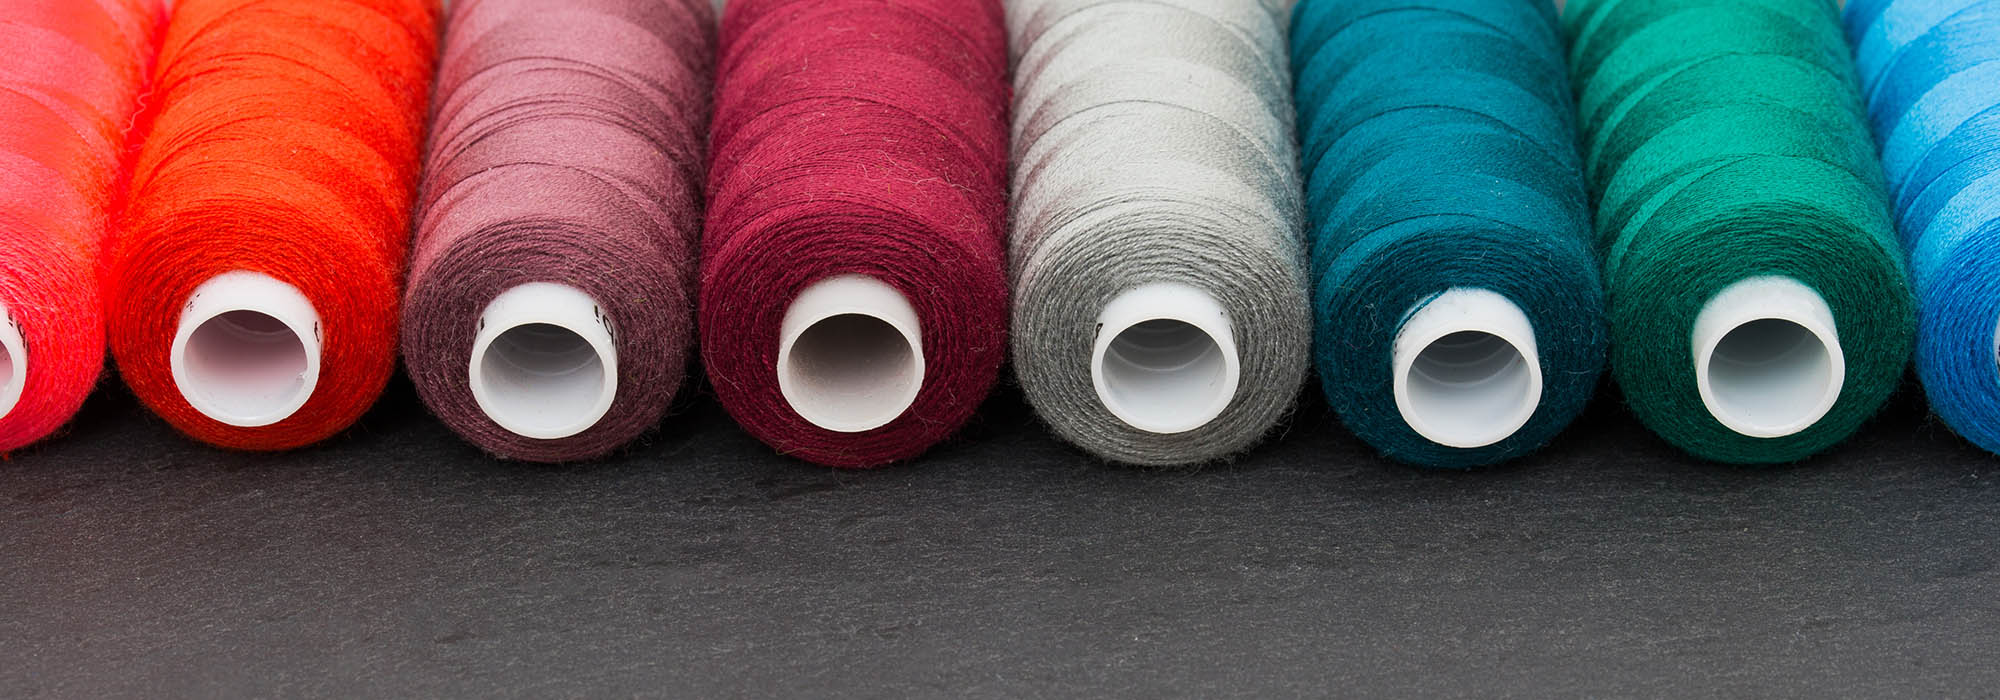 Supplying the UK with high quality, affordable sewing threads.